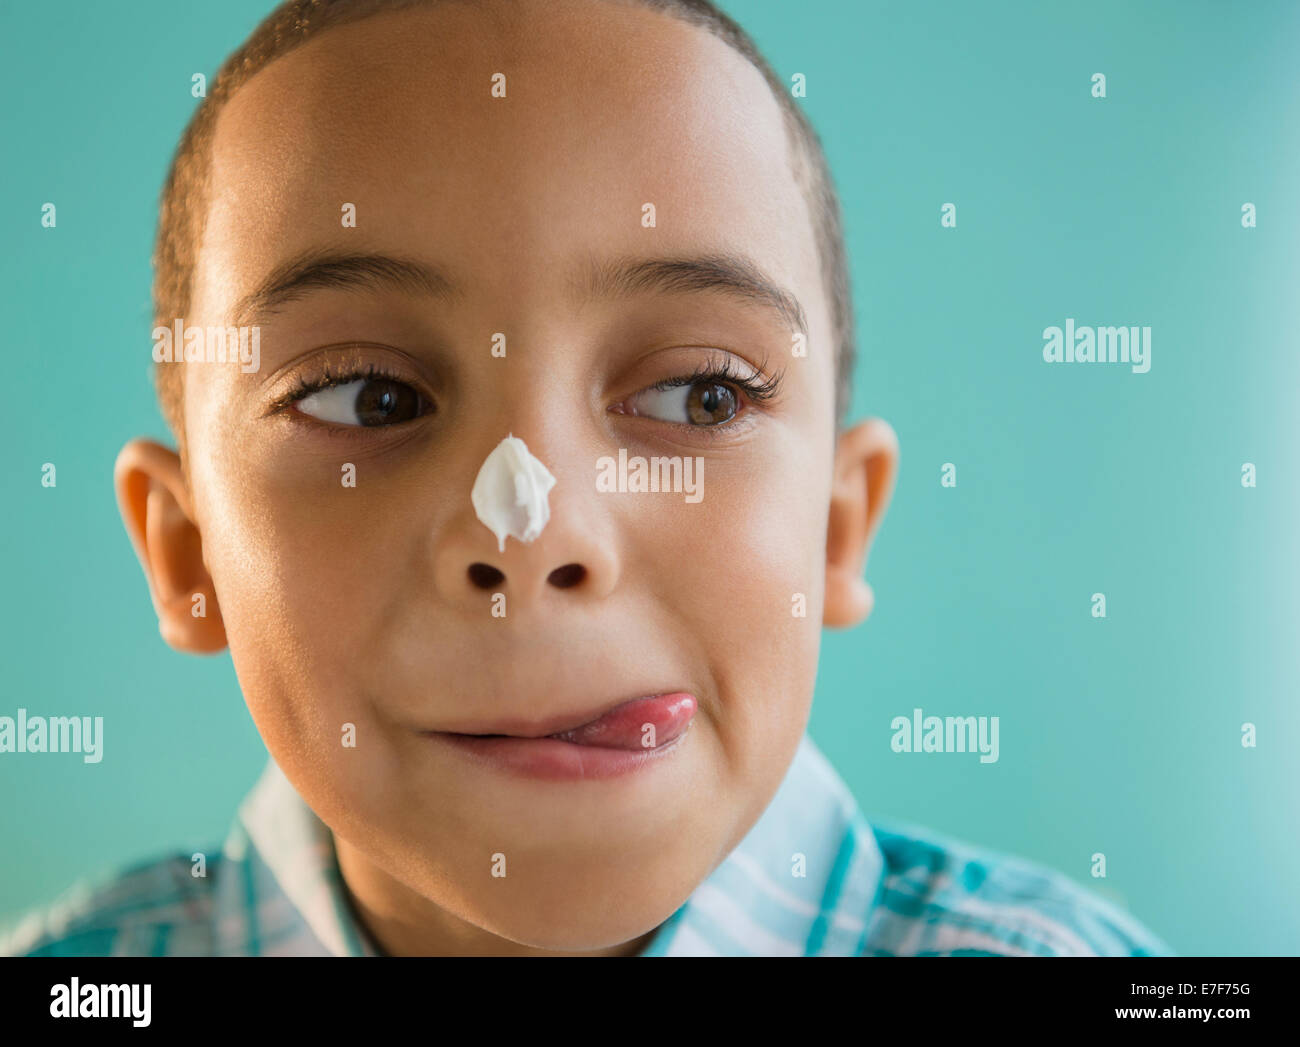 Mixed race boy with icing on nose Stock Photo